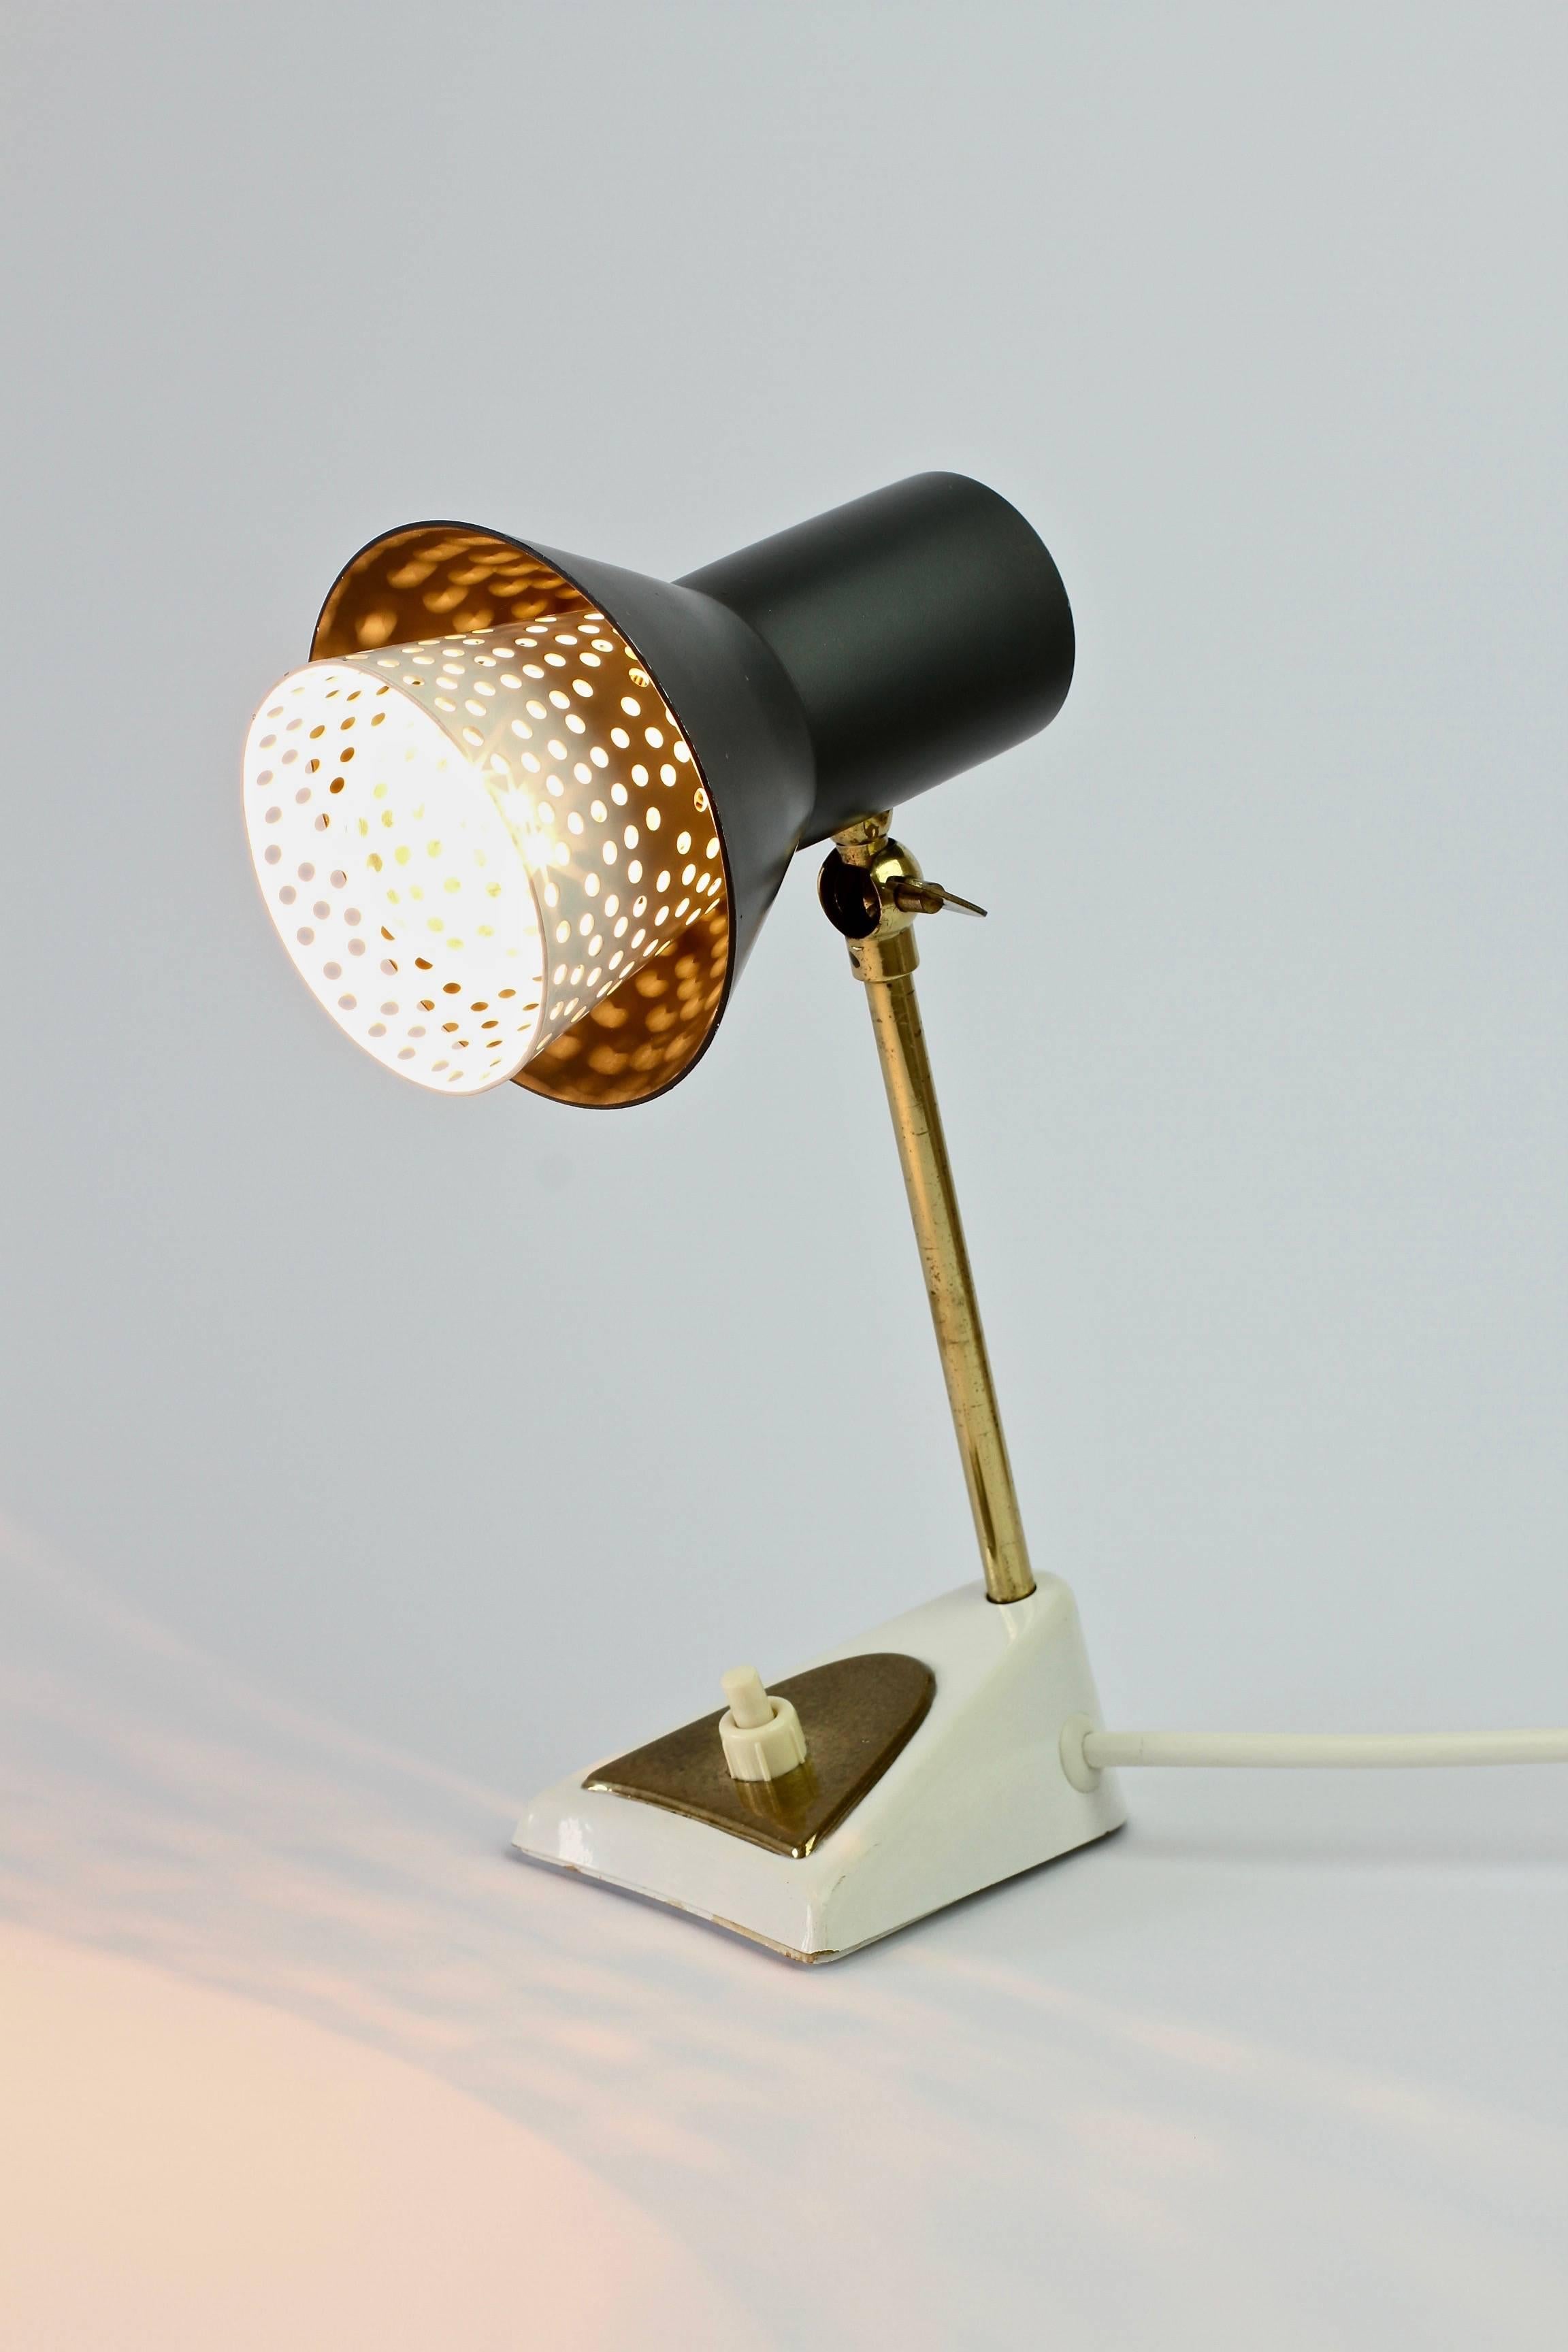 Vintage midcentury Modernist table or desk lamp in the style of Mathieu Matégot, circa 1950s-1960s. The perforated white metal inner shade is also similar to German designer Ernst Igl's lights for Hillebrand Leuchten. 

The lamp requires a single